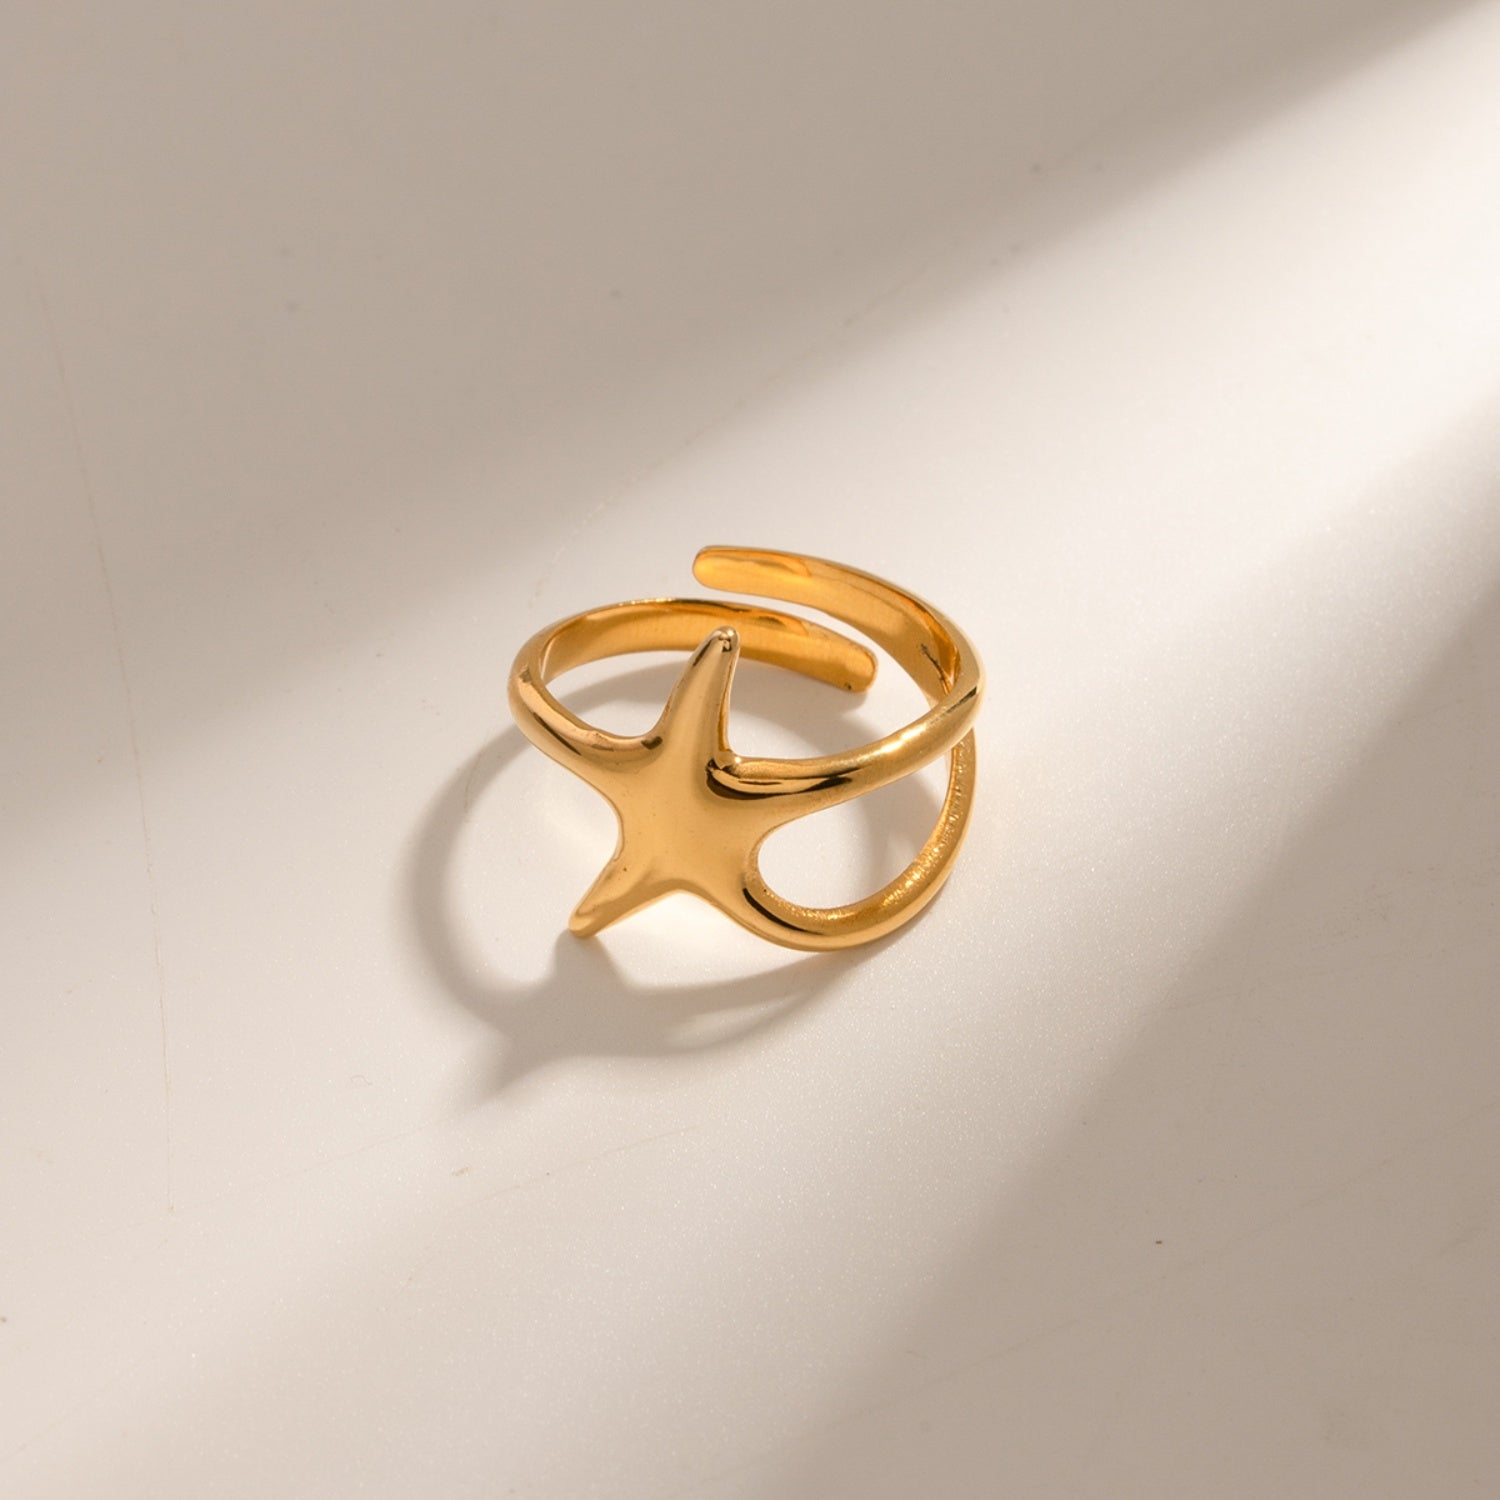 Gold-Plated Stainless Steel Star Ring - Tophatter Deals